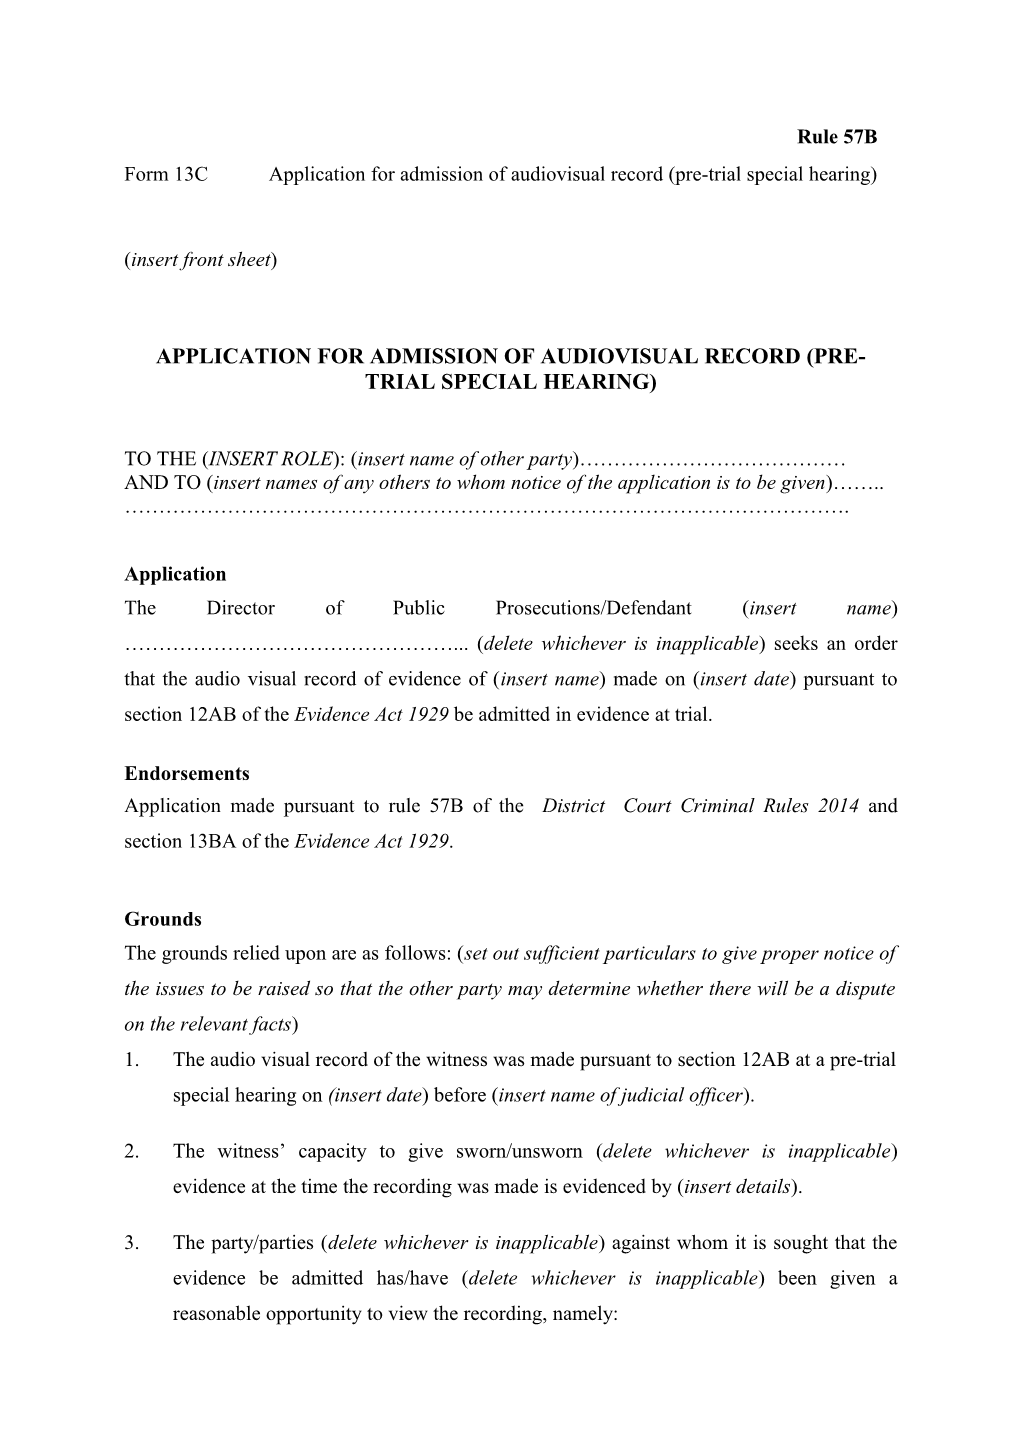 Form 13C - Application for Admission of Audiovisual Record (Pre-Trial Special Hearing)